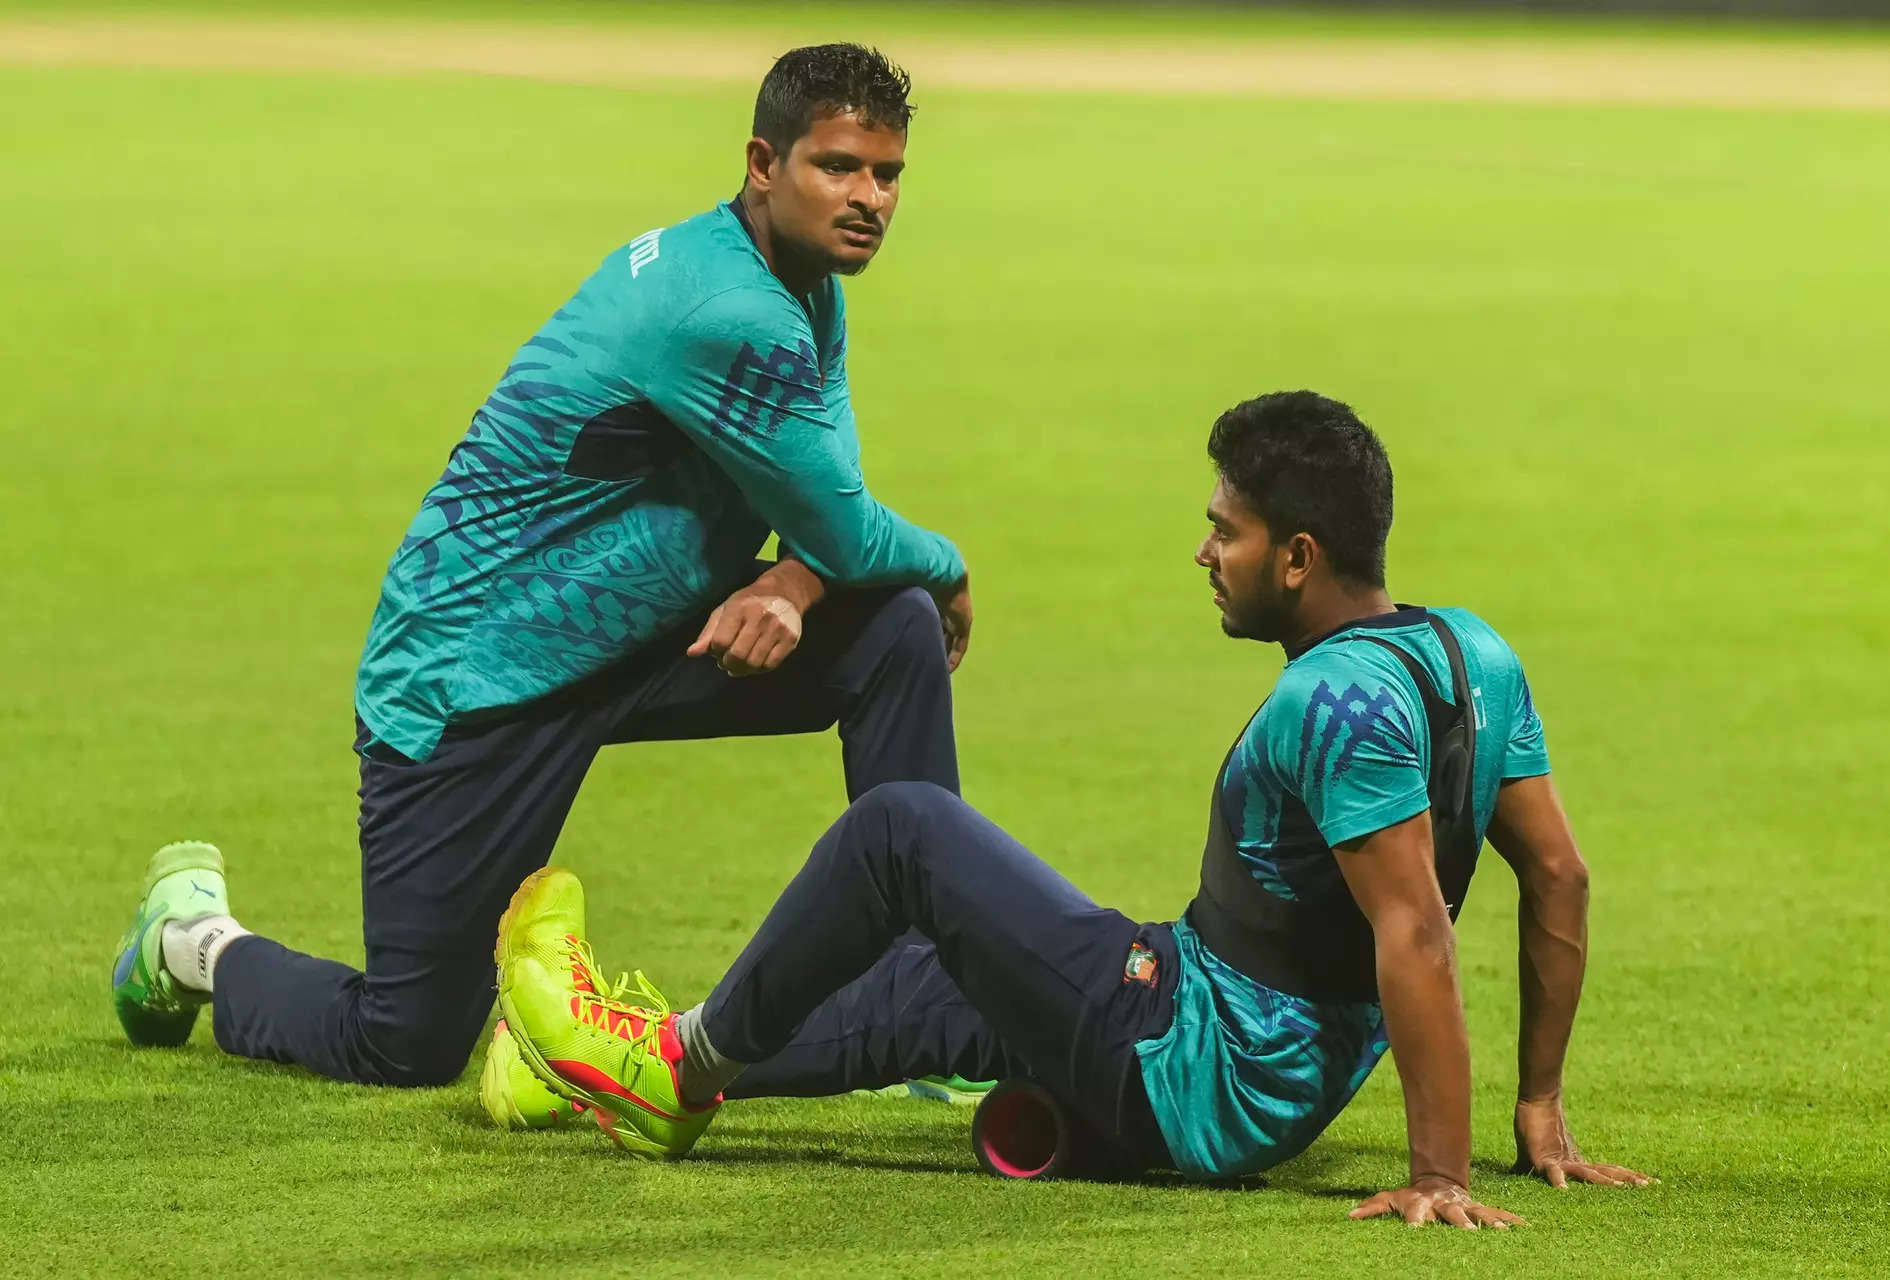 Bangladesh's Nasum Ahmed and Mehidy Hasan Miraz during a practice session. (PTI Photo)